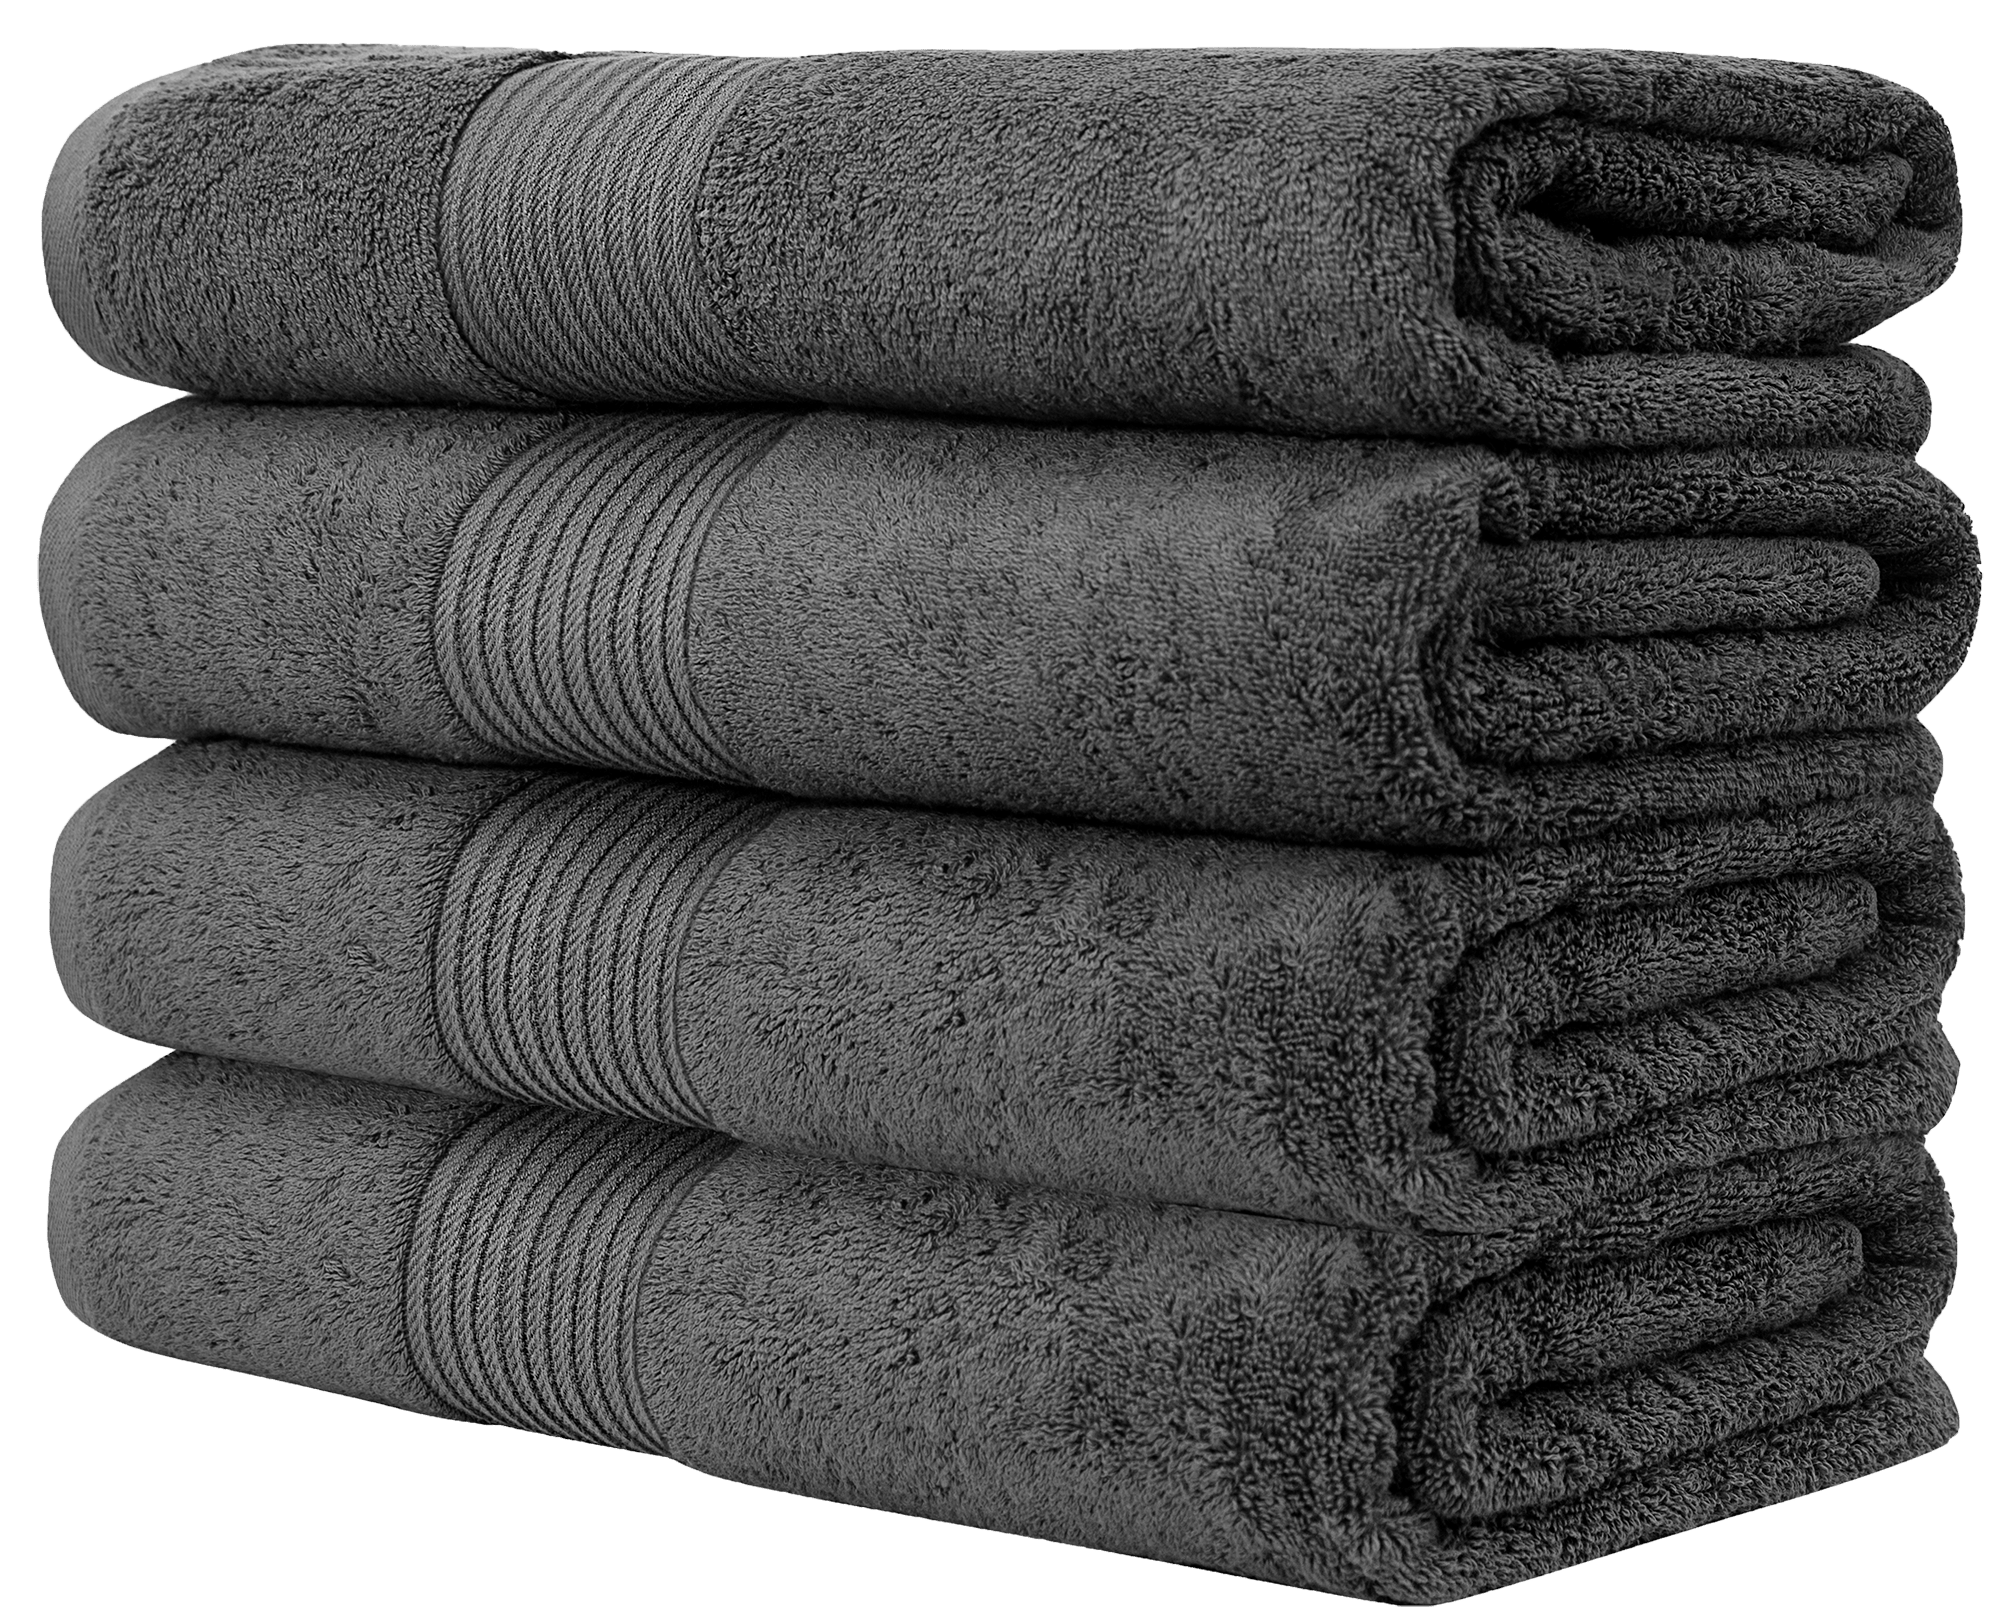 Buy Bliss Classic 650 GSM Bath Towel at Bumble Towels